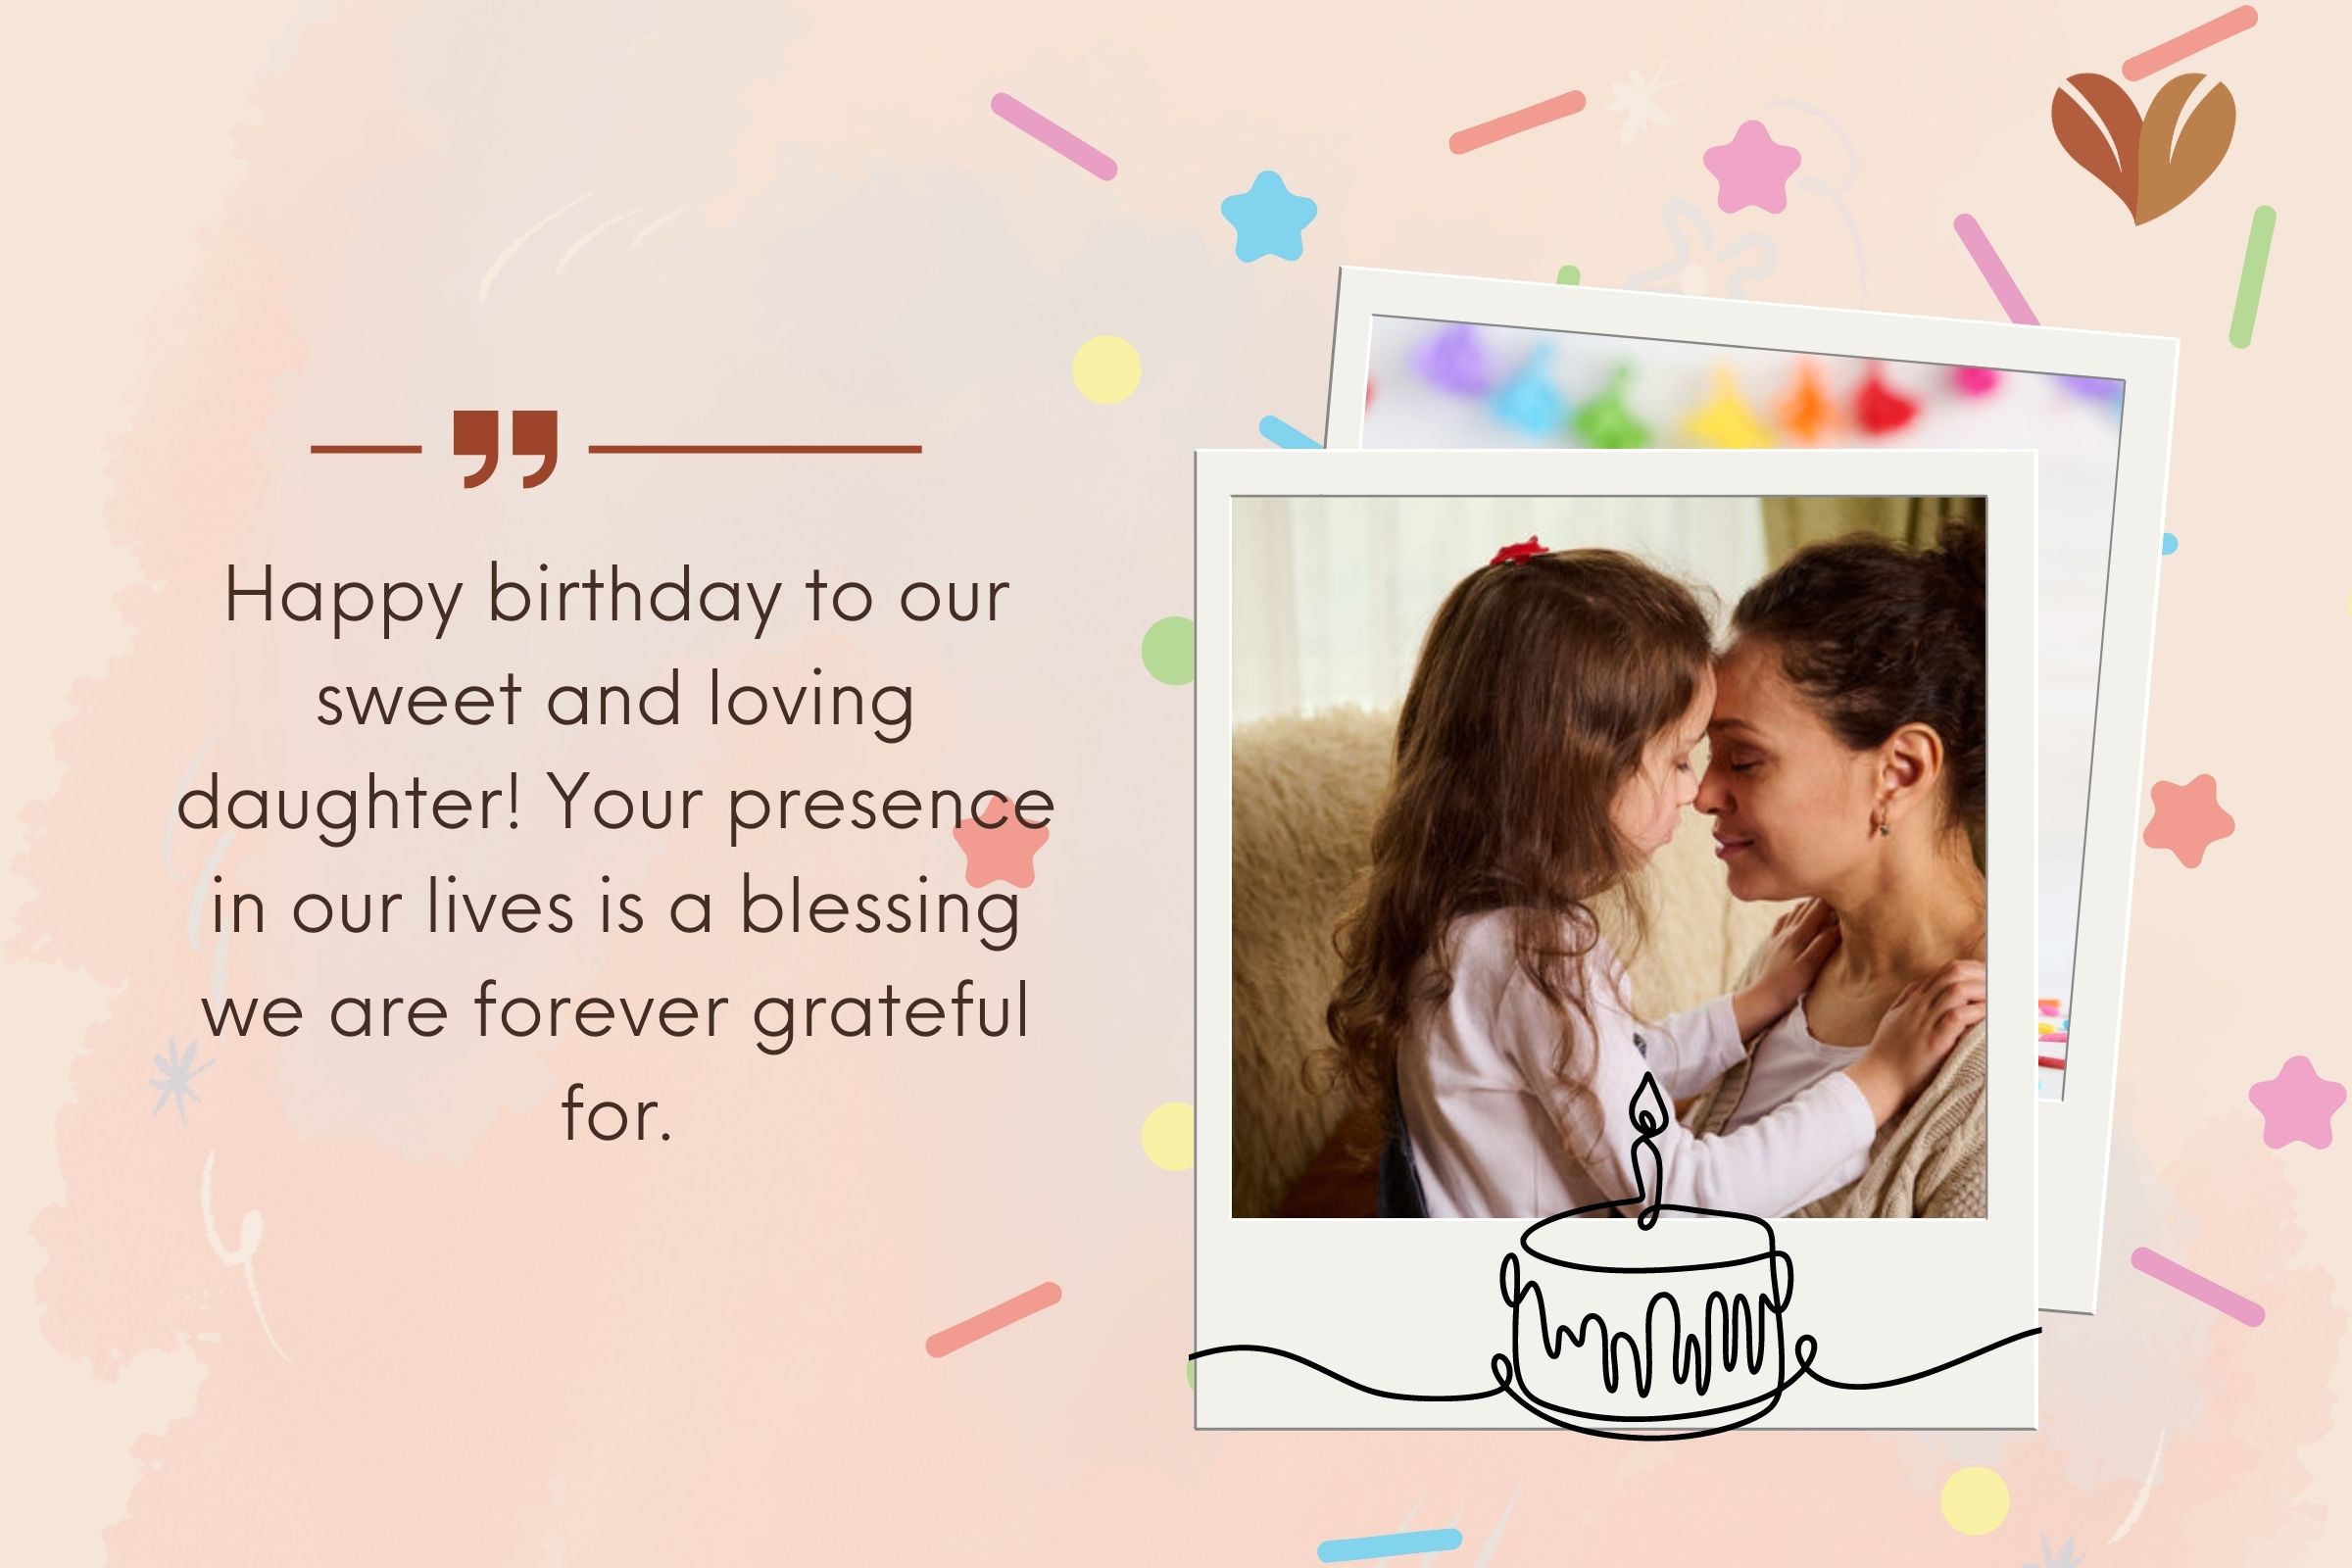 Excitement and joy in birthday greetings for daughter